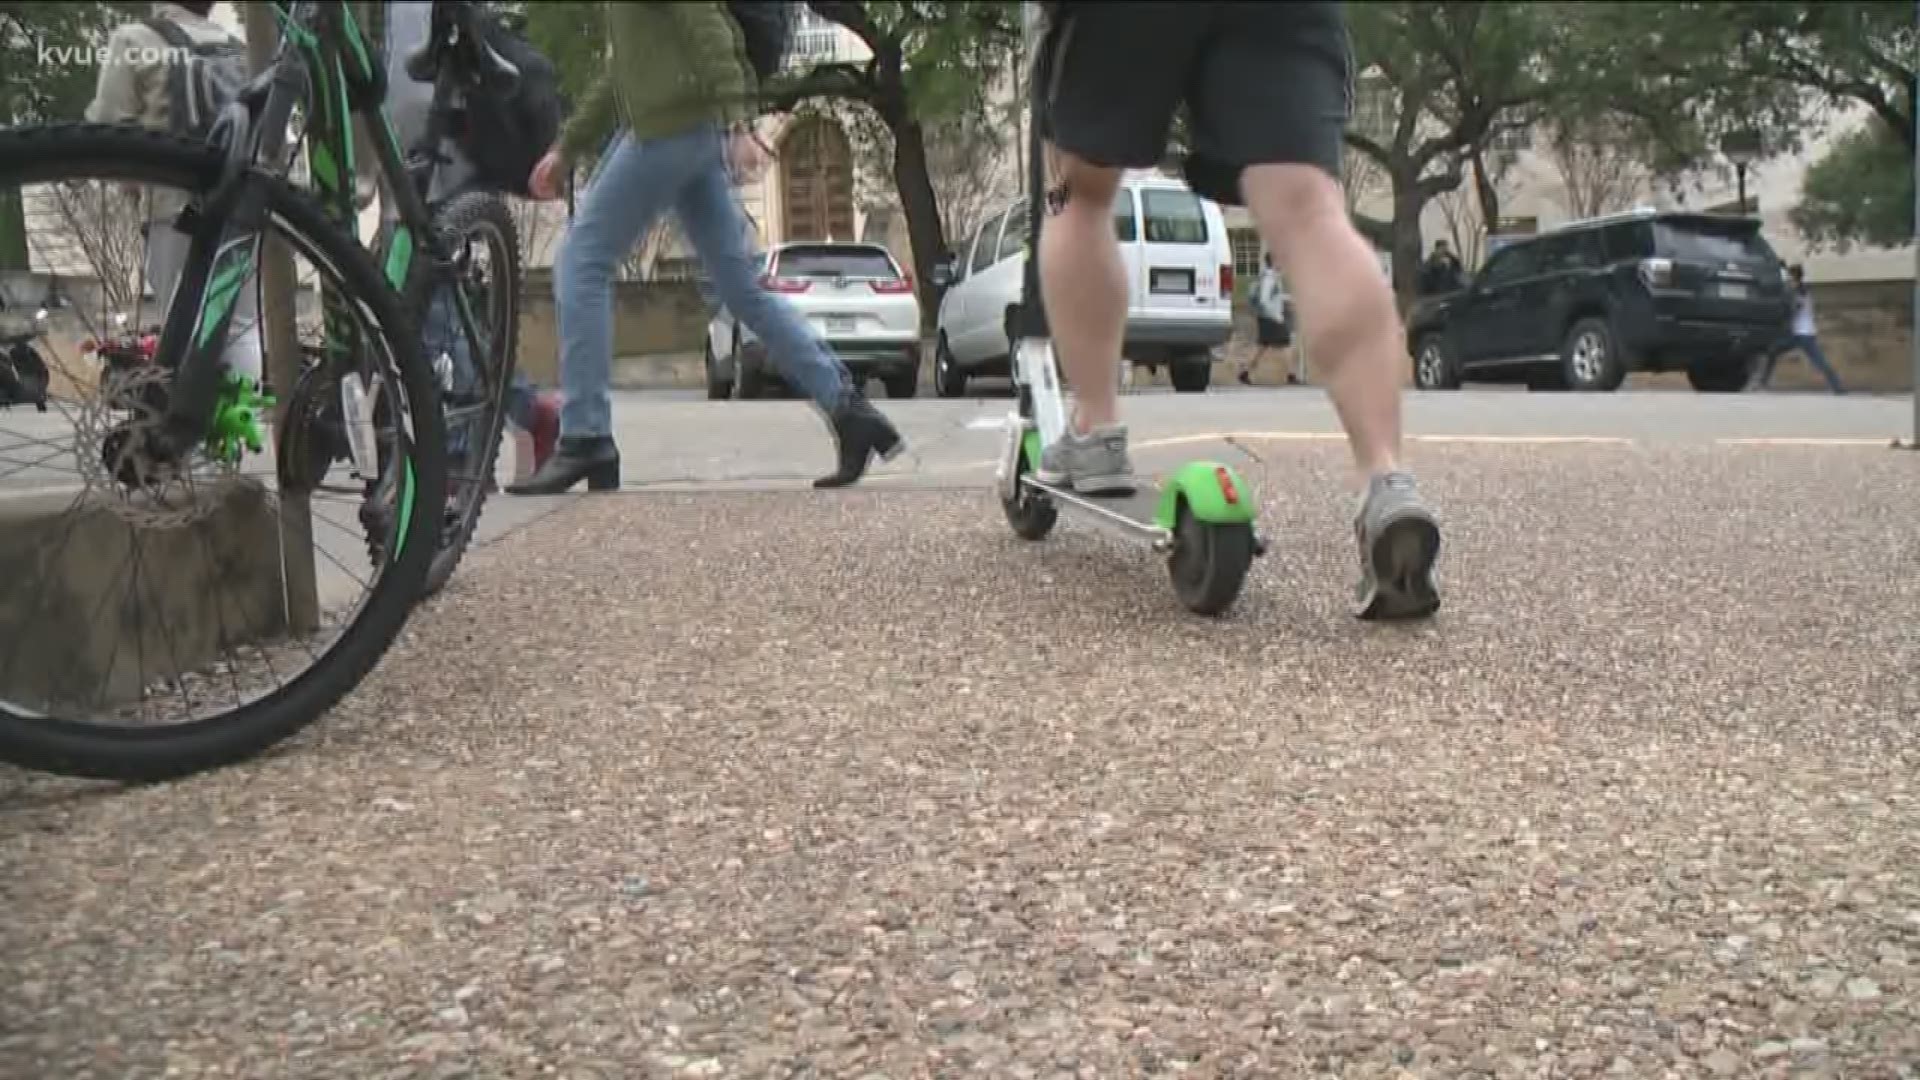 The University of Texas is charging companies if scooters aren't left where they schould be. That cost could come back to the customers.